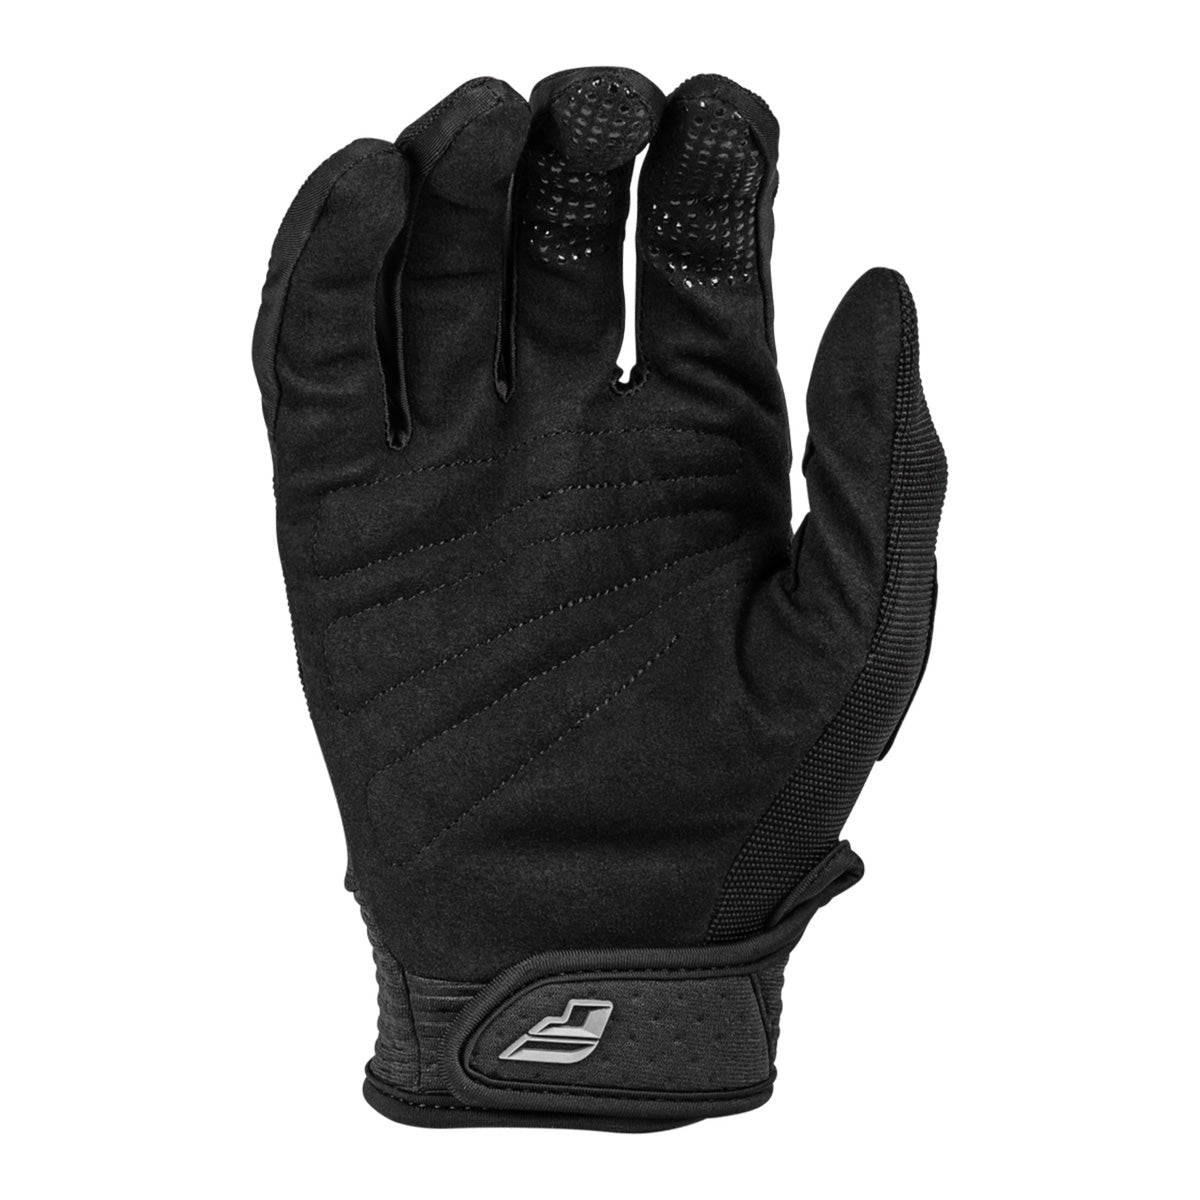 Fly Racing F-16 BMX Race Gloves-Black/Charcoal